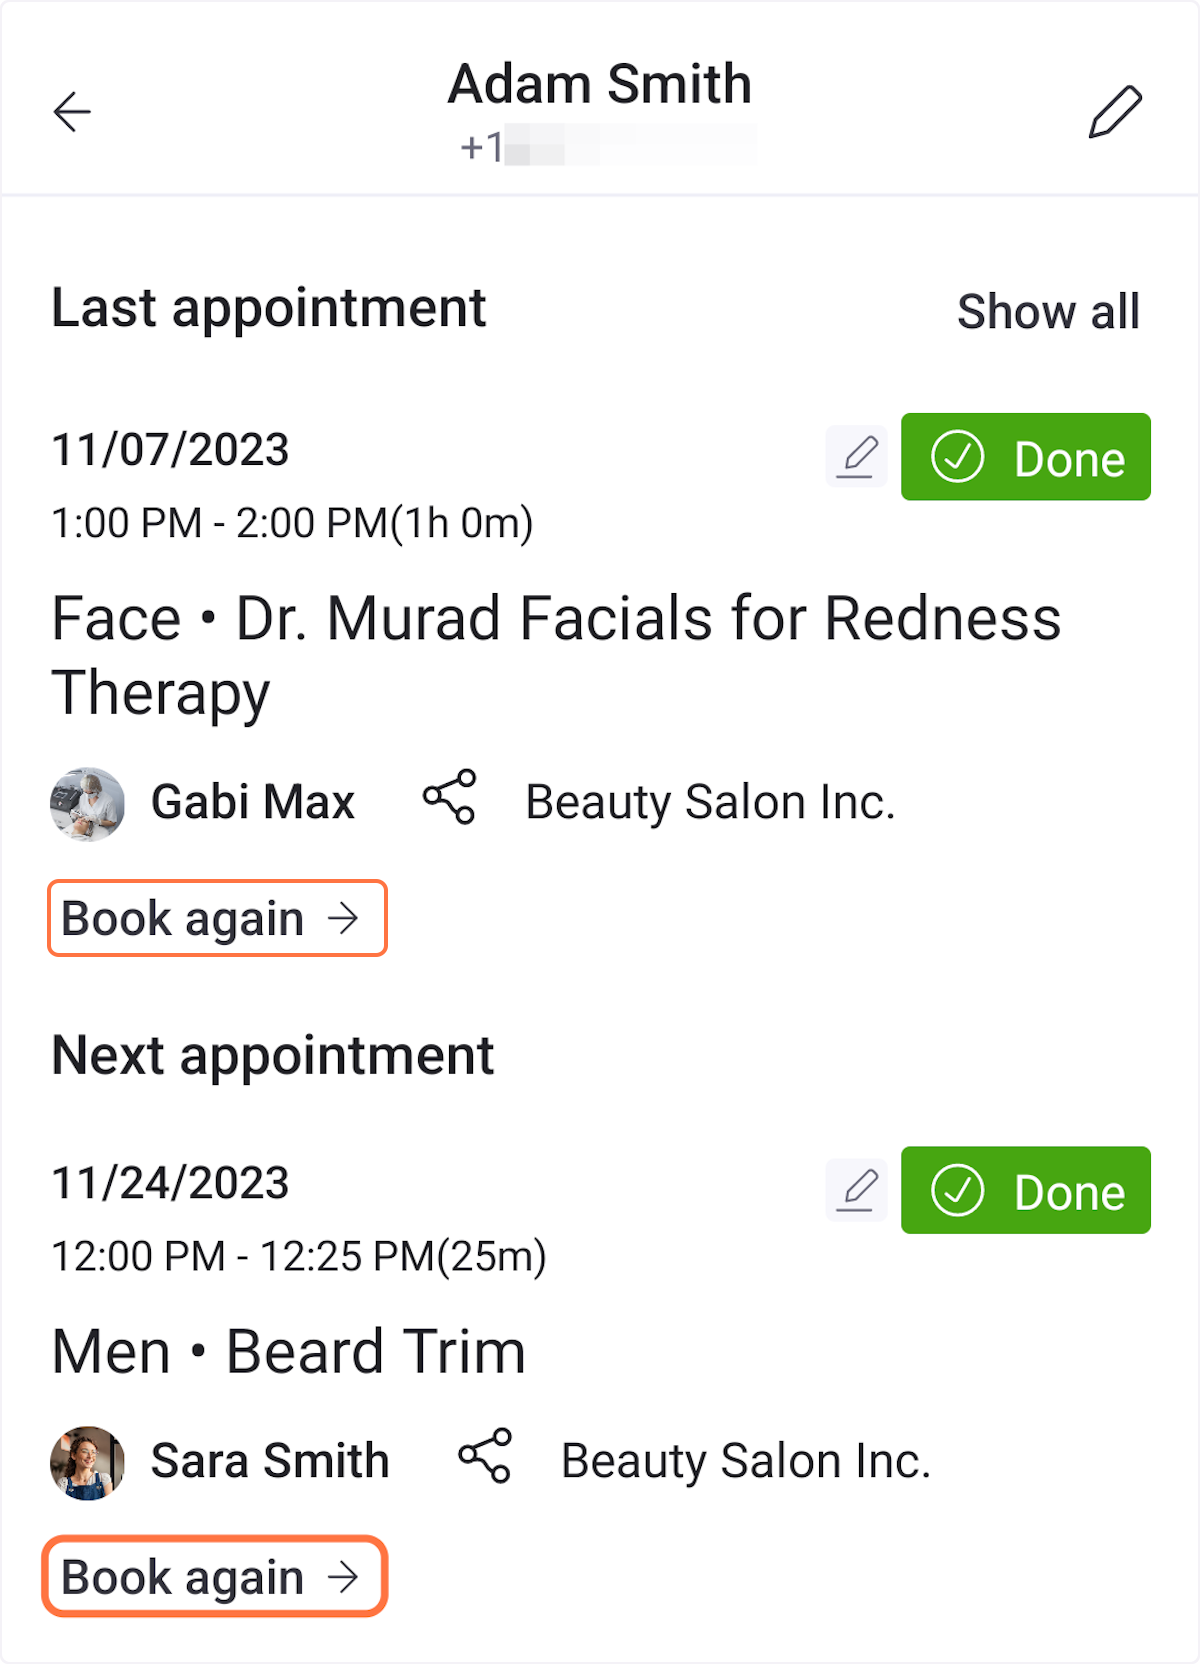 You can view client appointments and quickly book them again.